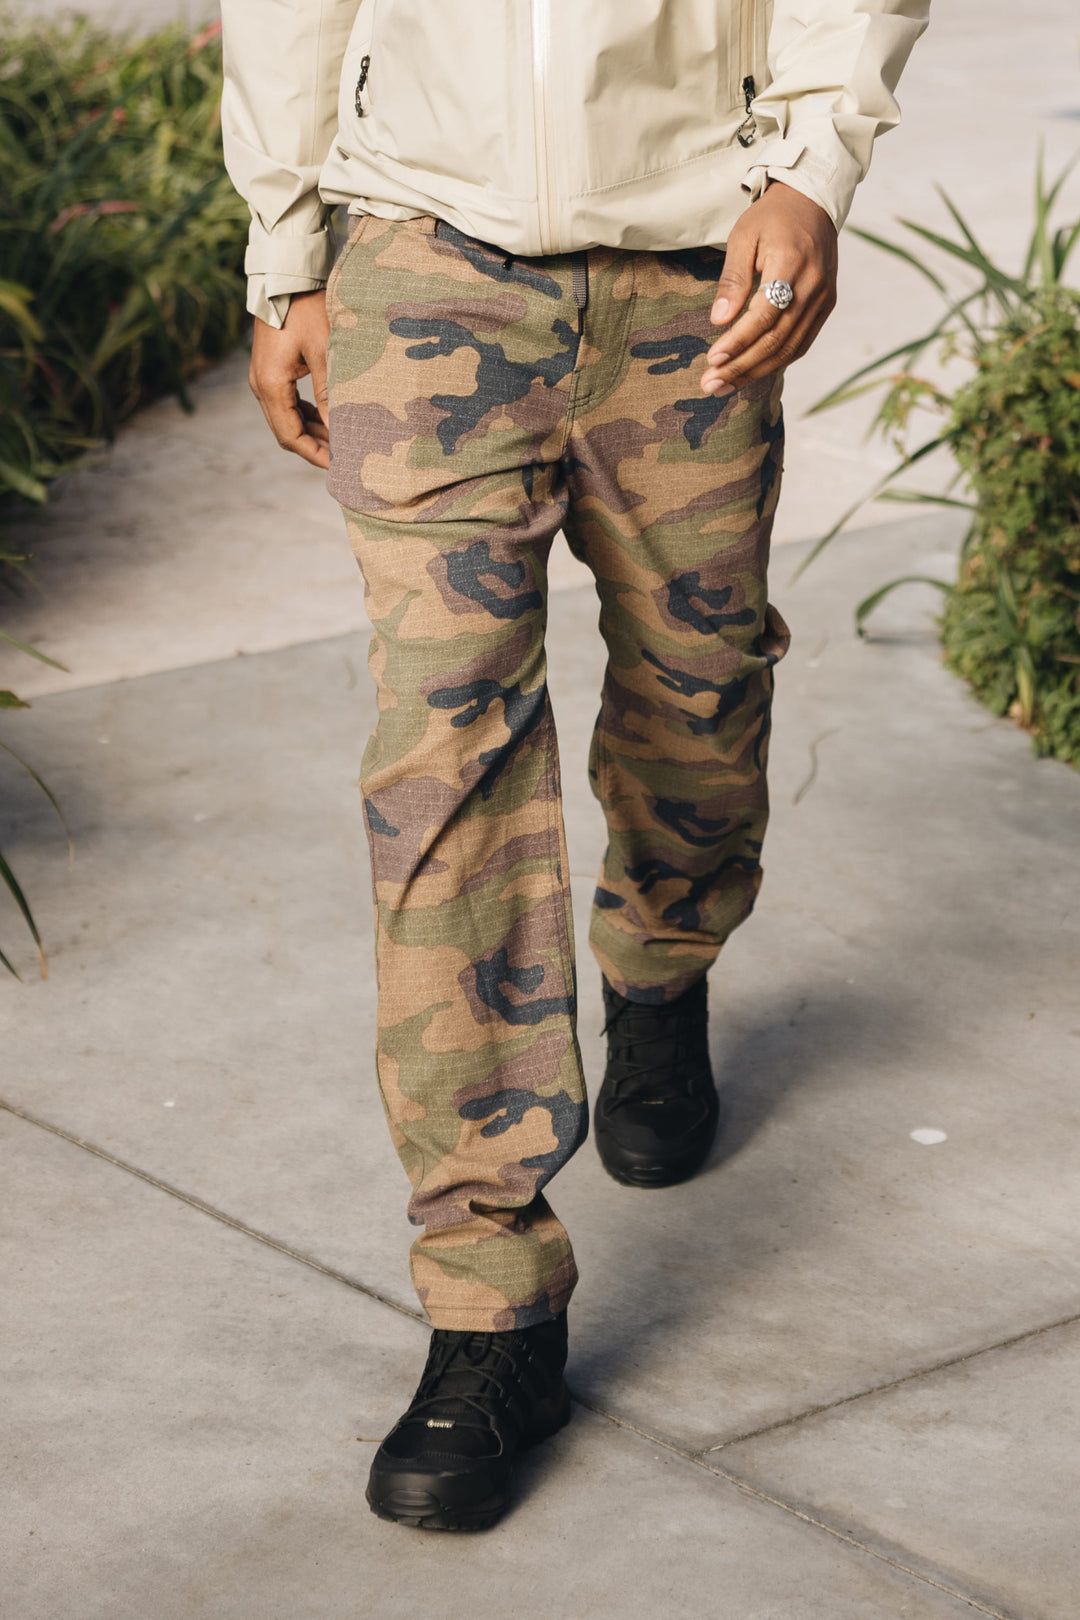 686 EVERYWHERE PANT RELAXED FIT - DARK CAMO - Sun Diego Boardshop